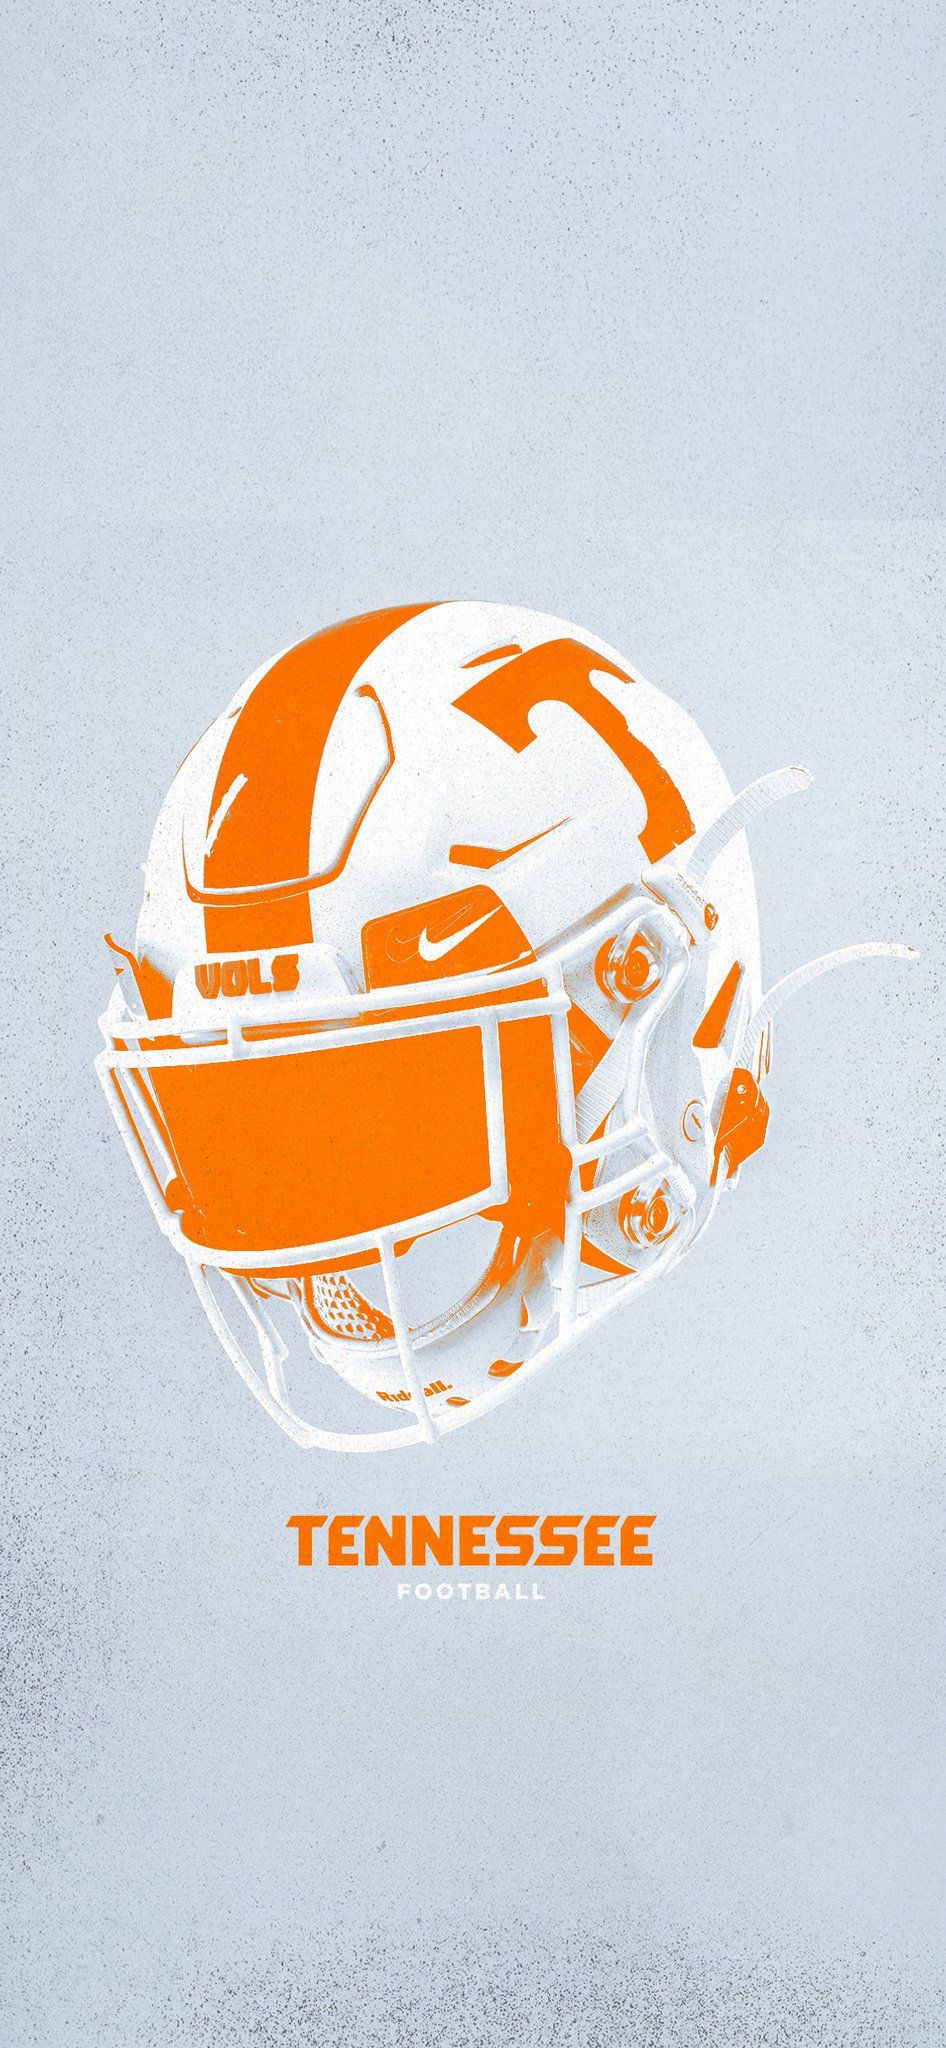 Tennessee. Tennessee volunteers football, Sports graphic design, Sports wallpaper